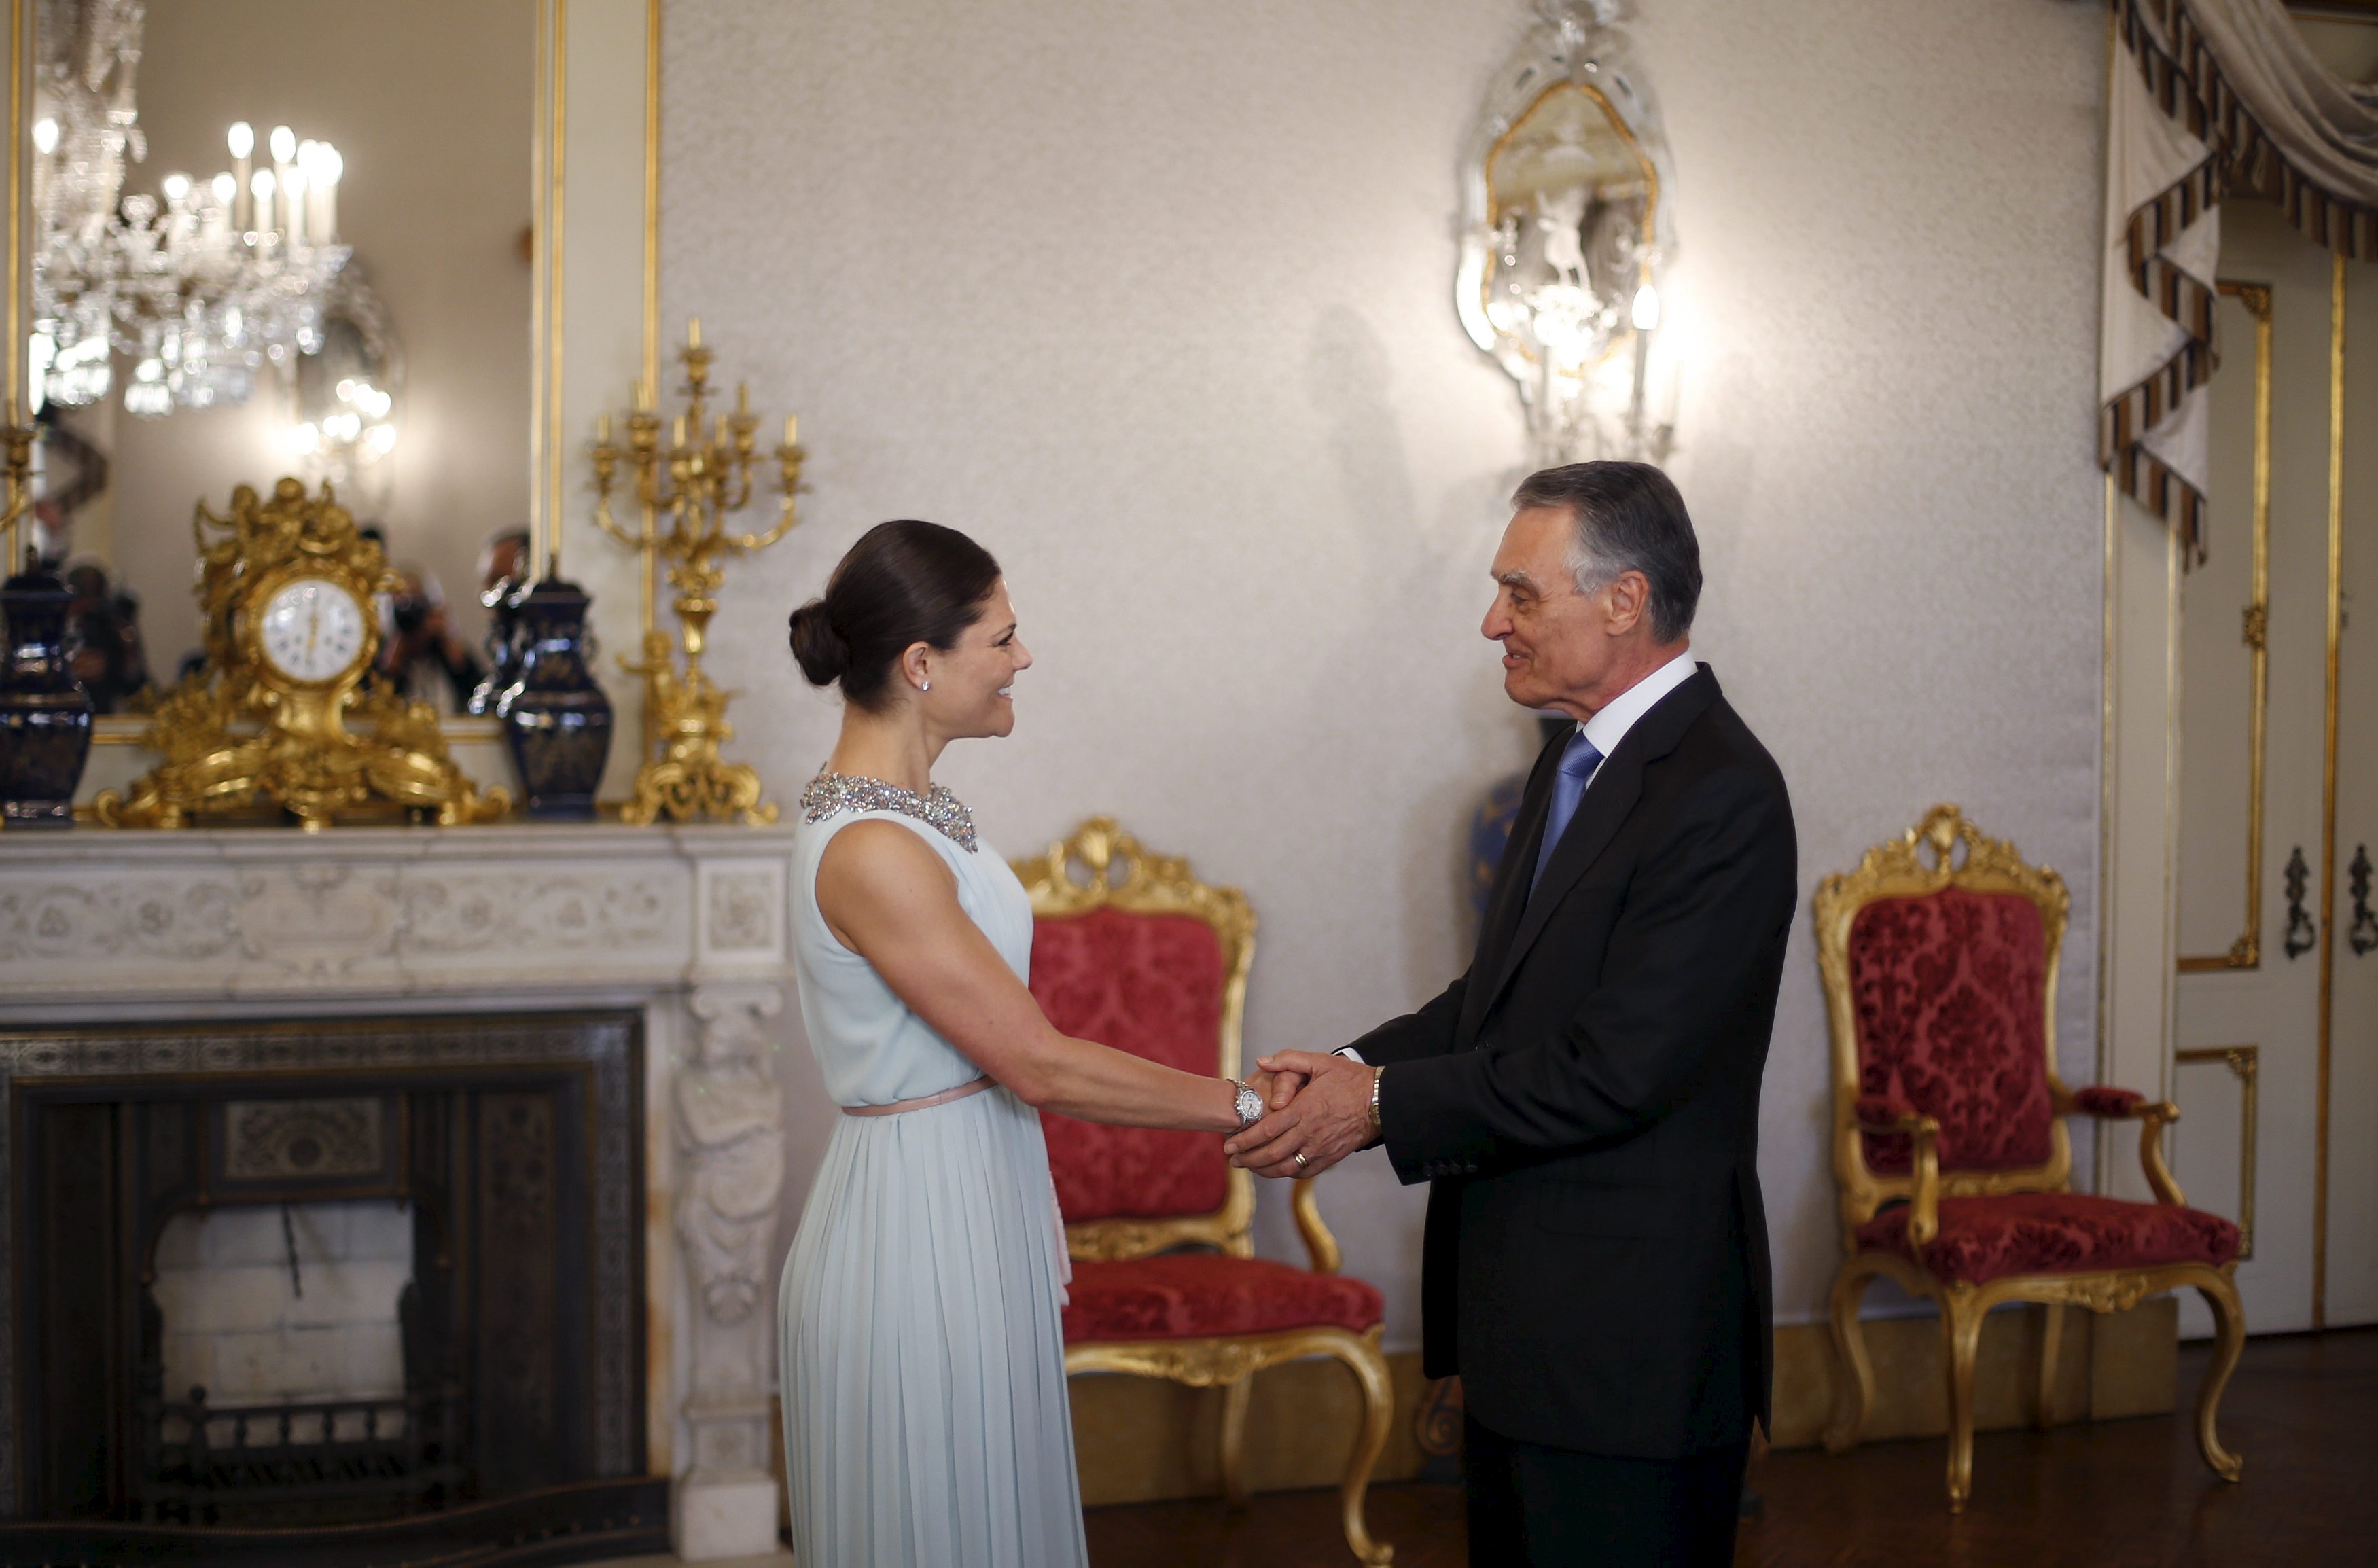 Sweden's Crown Princess Victoria shakes hands with Portugal's President Anibal Cavaco Silva during a meeting at Belem presidential palace in Lisbon, Portugal June 5, 2015. REUTERS/Rafael Marchante